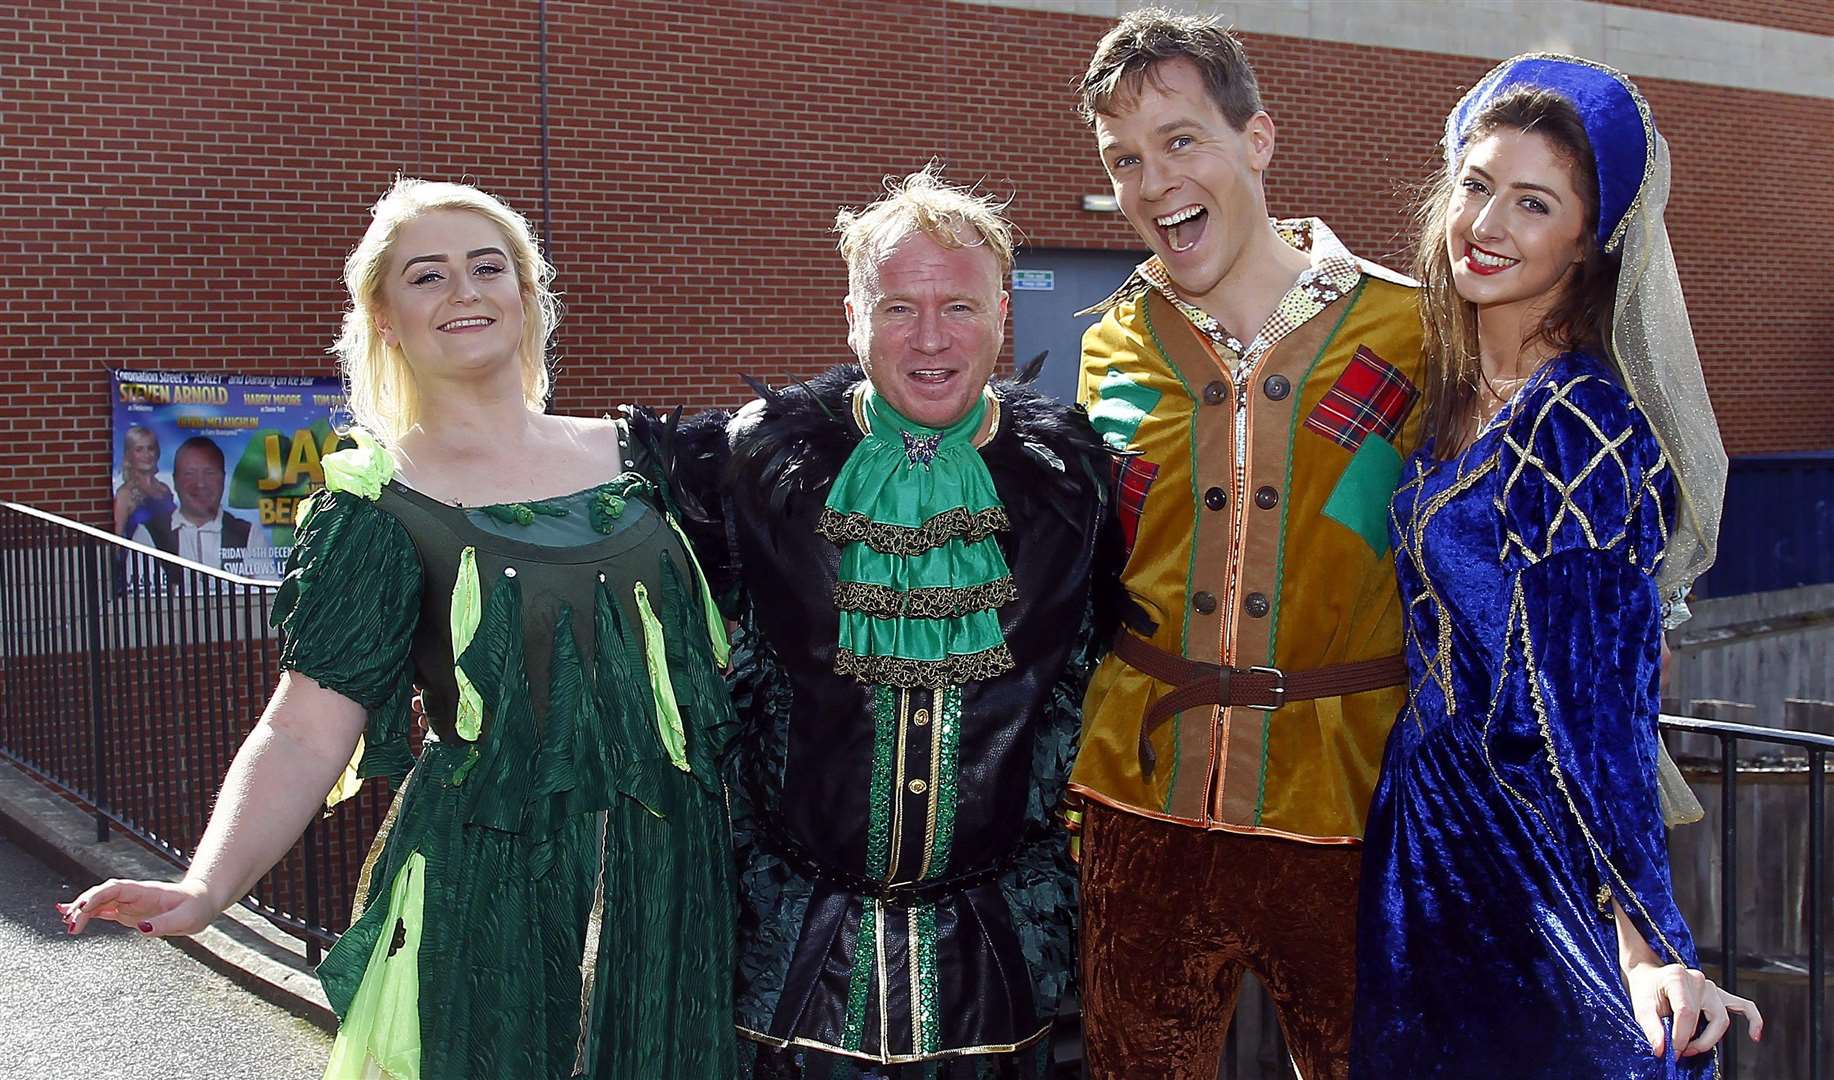 The casts of Jack and the Beanstalk: Olivia McLaughin, Steven Arnold, Tom Balmont and Katie Burke